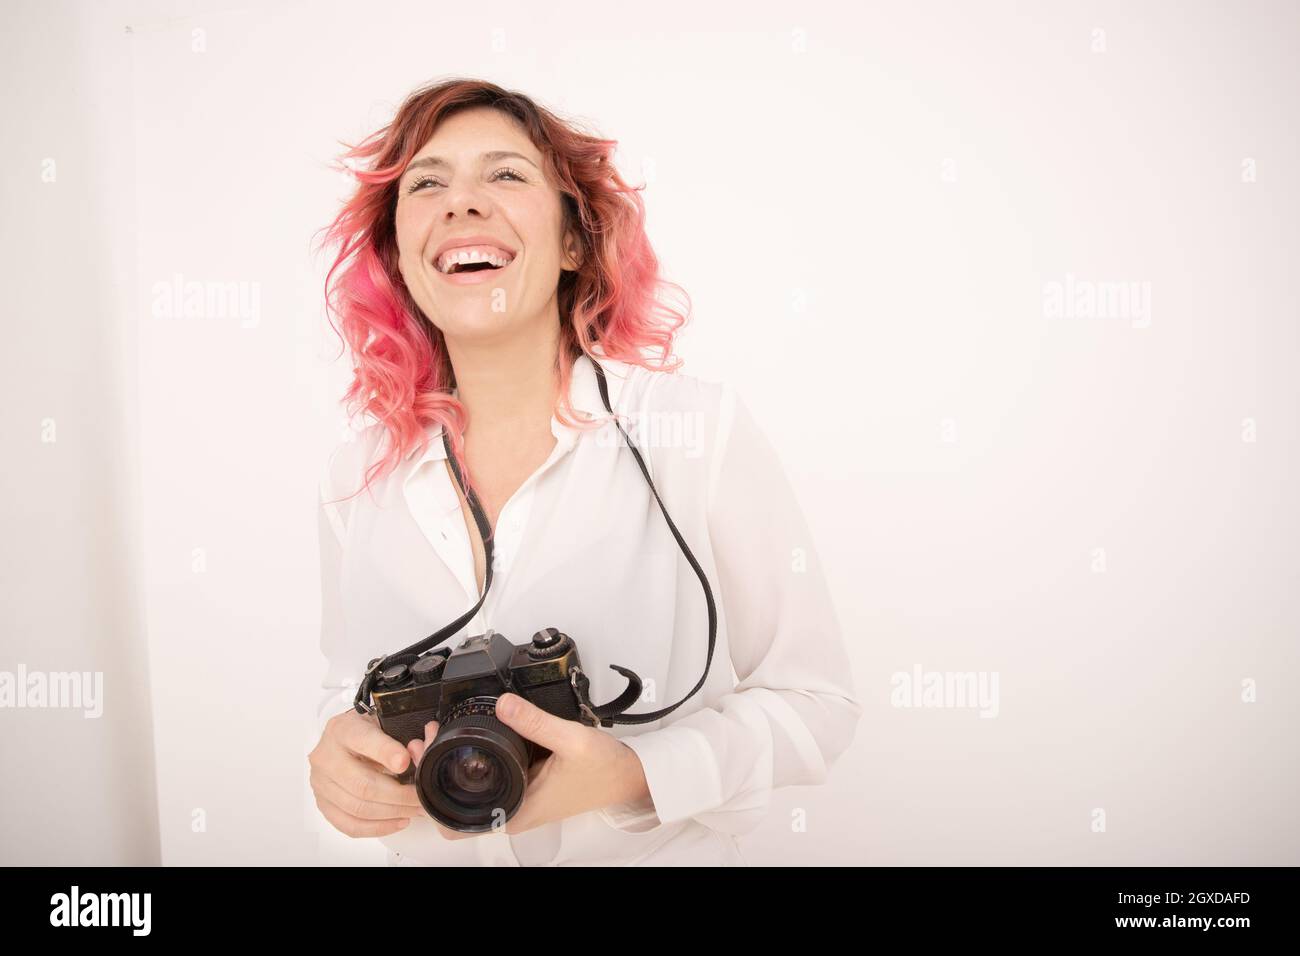 Smile female photographer with pink hair holding a professional photo camera in her hands in light room Stock Photo